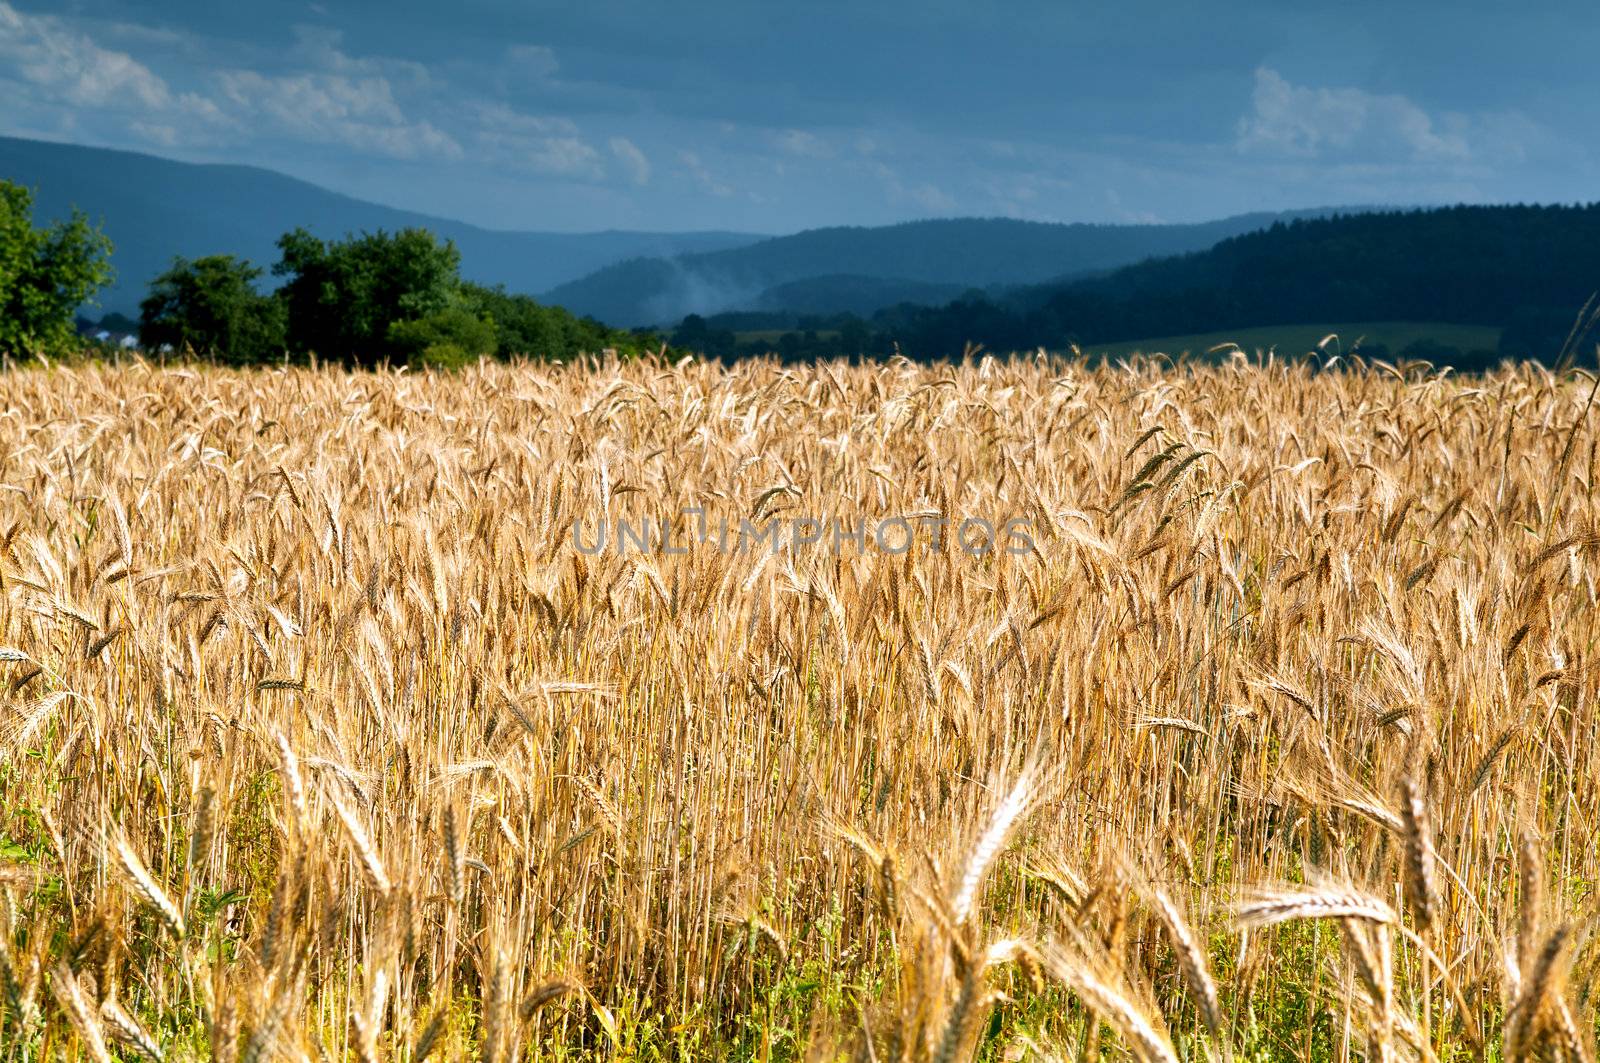 wheat field in summer in mountains during the rain